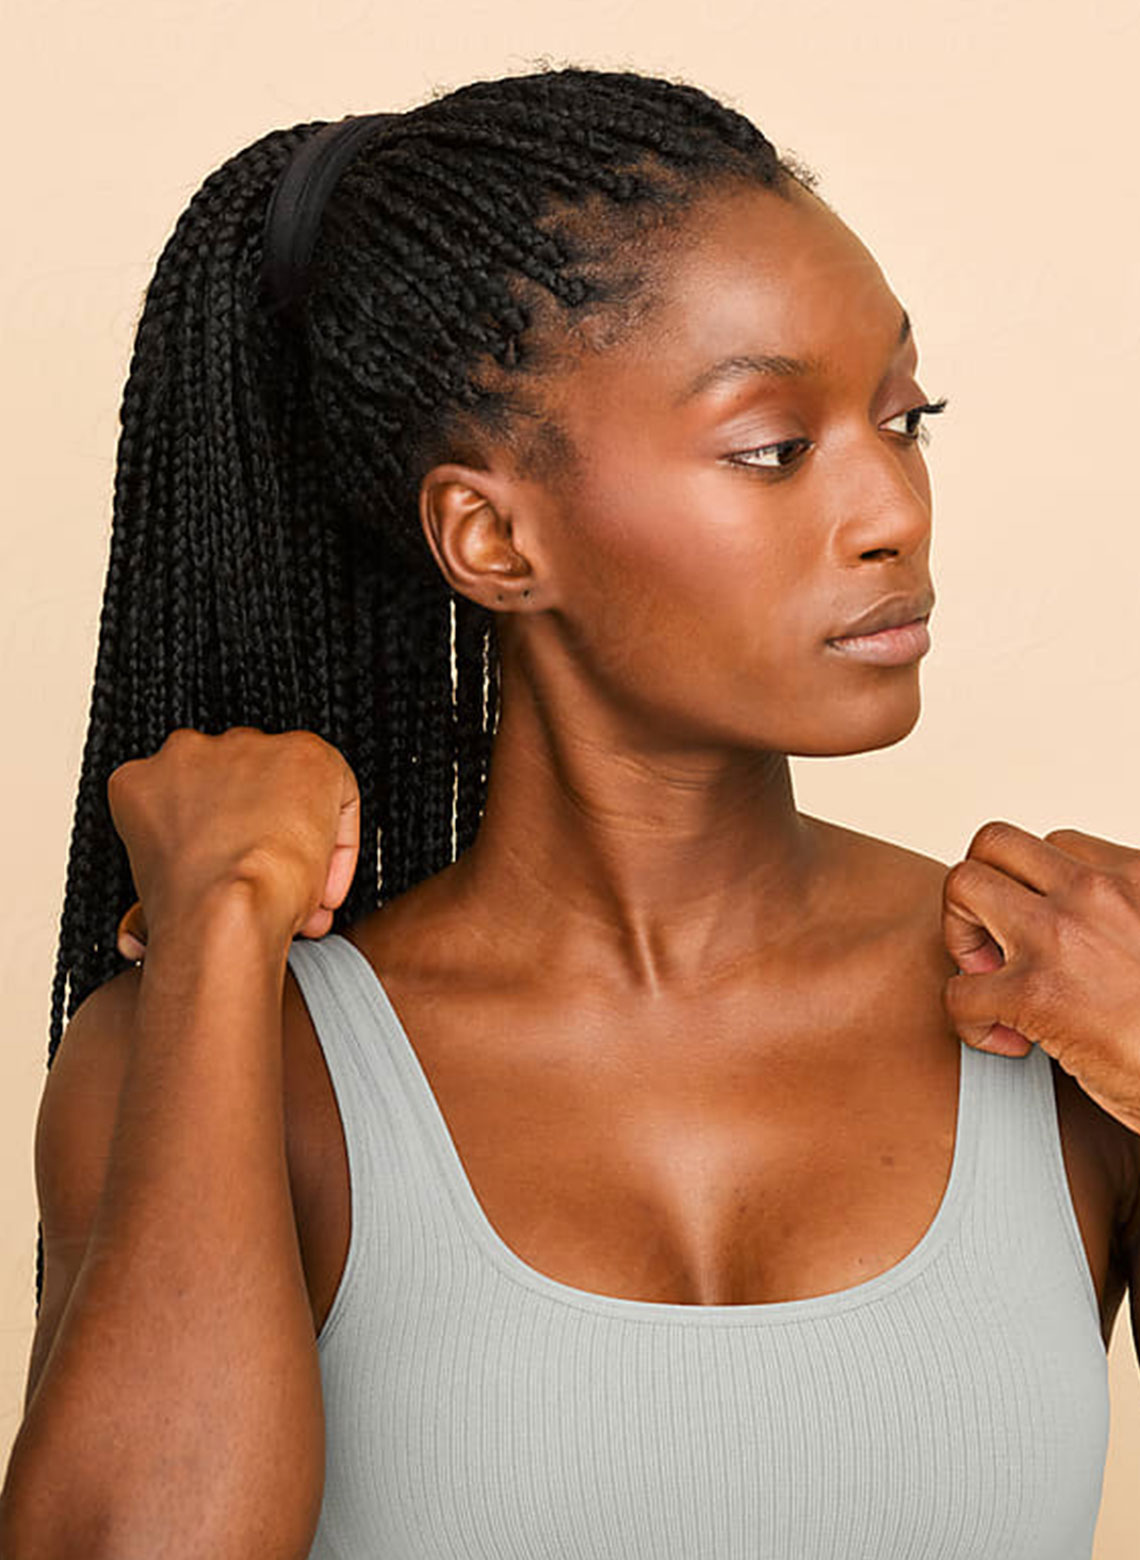 person wearing grey tank top with hair in long ponytail box braids, looking off to the side with hands adjusting tank to straps